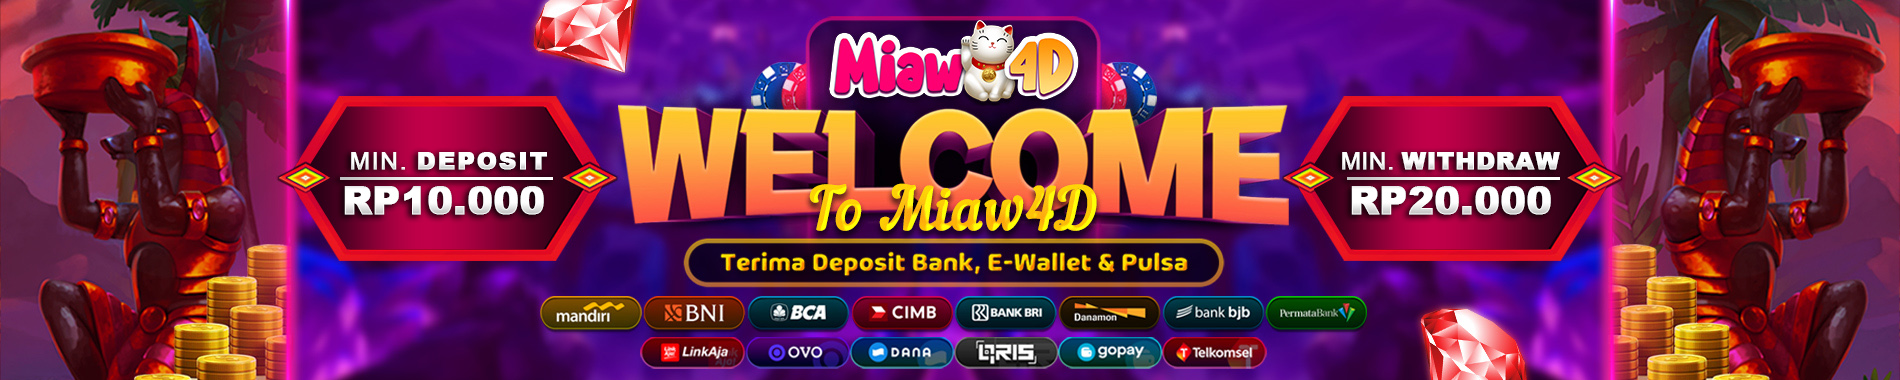 Welcome to Miaw4D